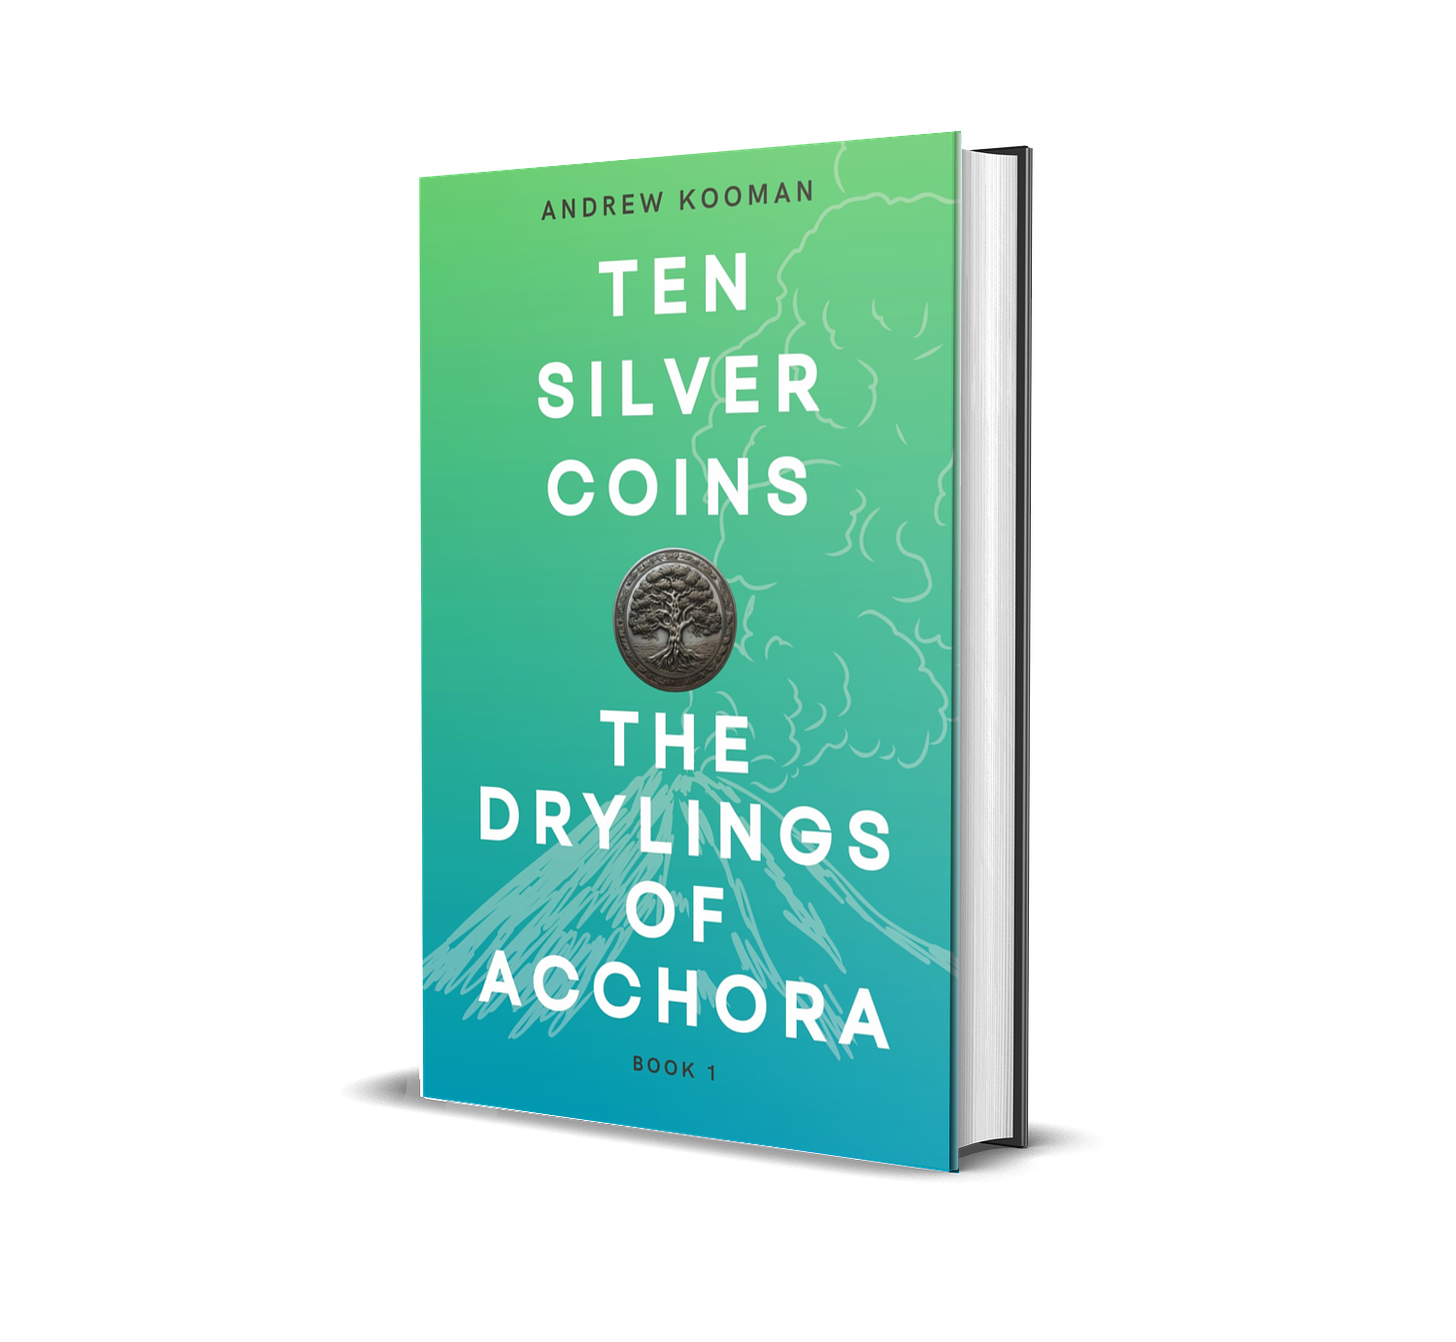 Ten Silver Coins: The Drylings of Acchora - book one by Andrew Kooman